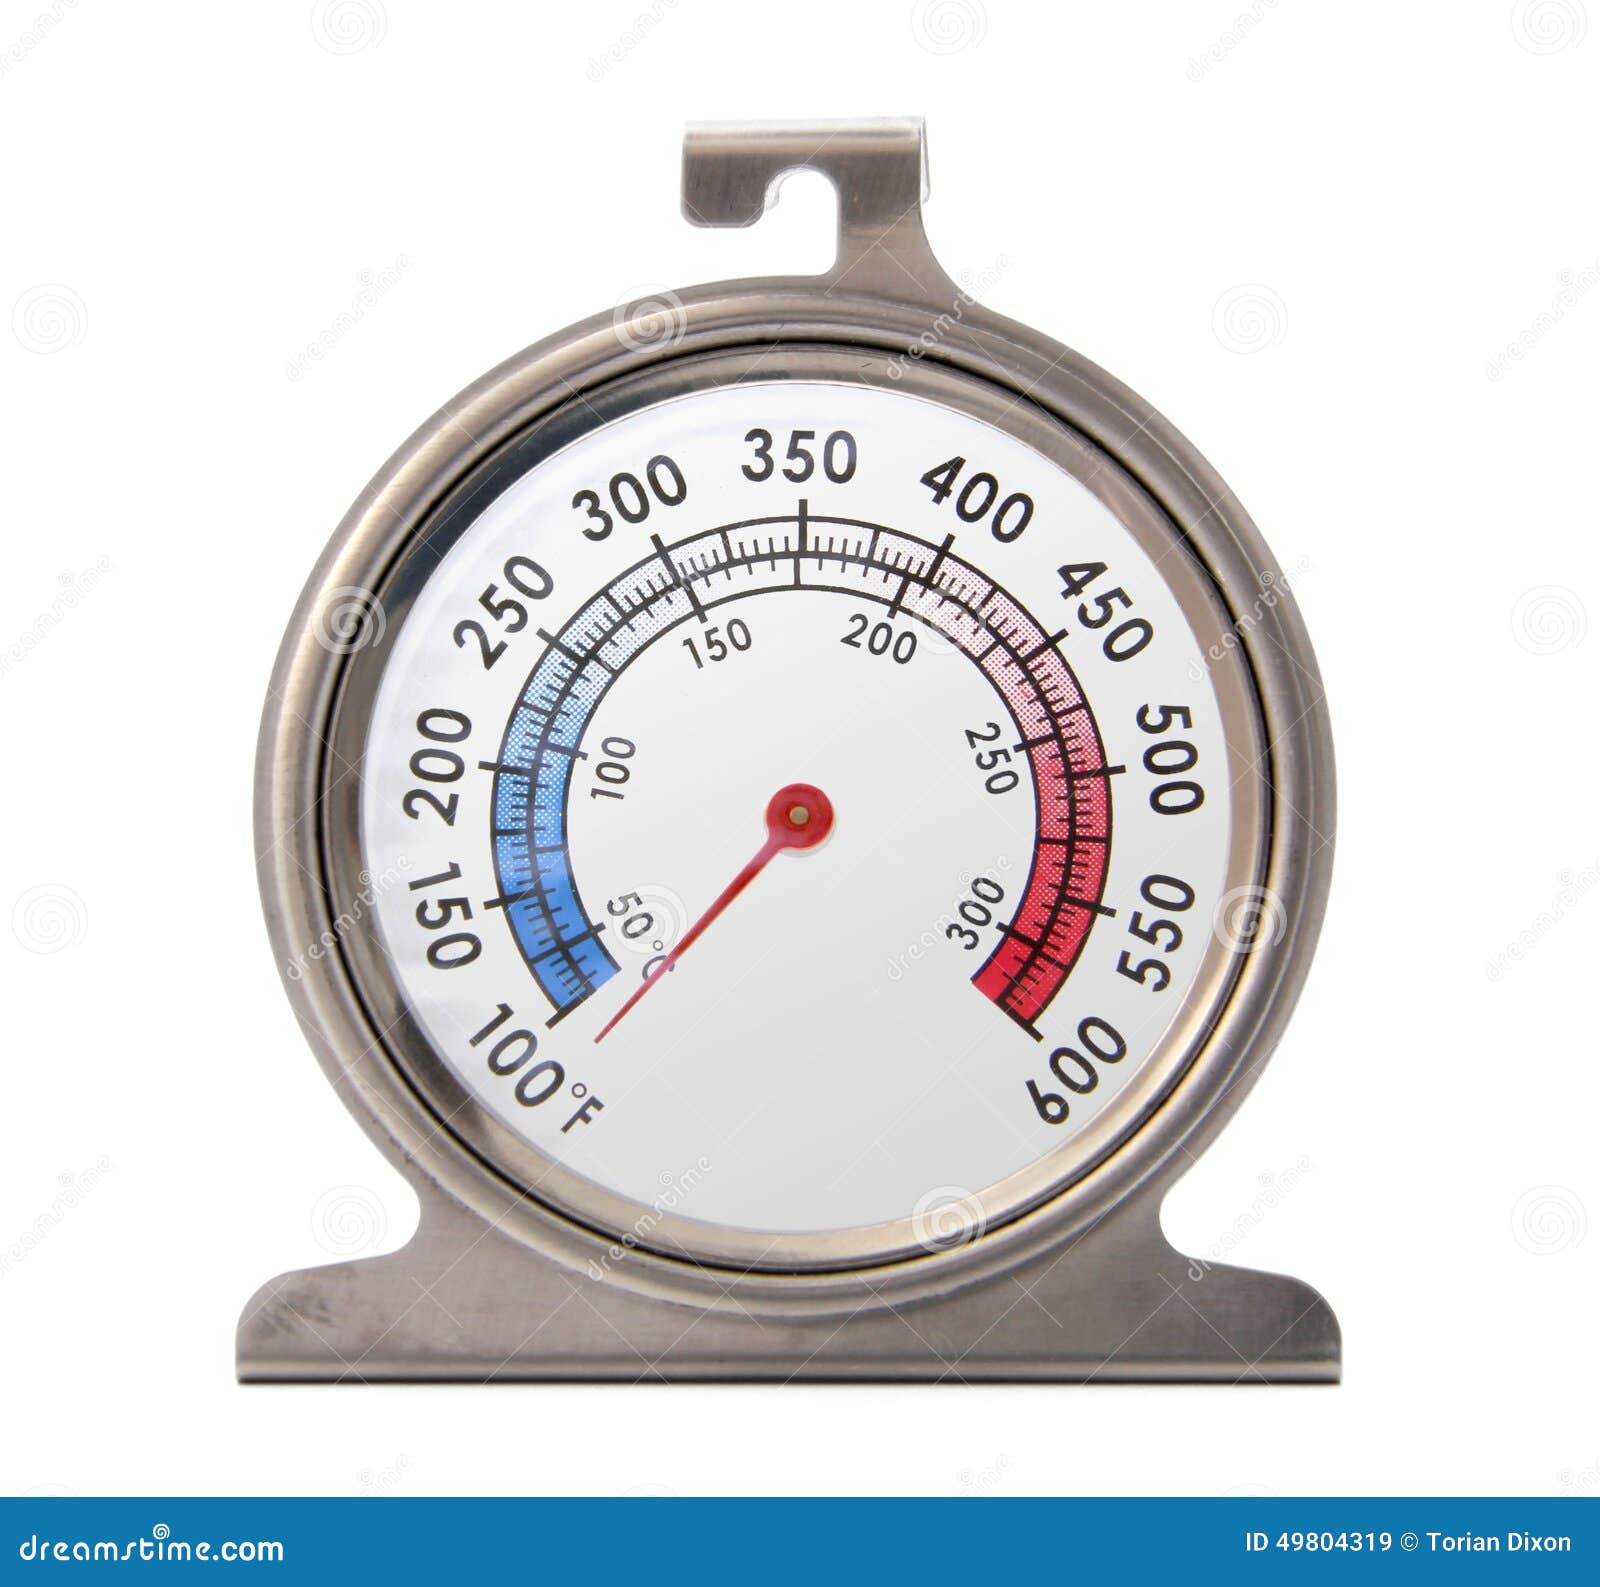 https://thumbs.dreamstime.com/z/oven-thermometer-isolated-front-picture-49804319.jpg